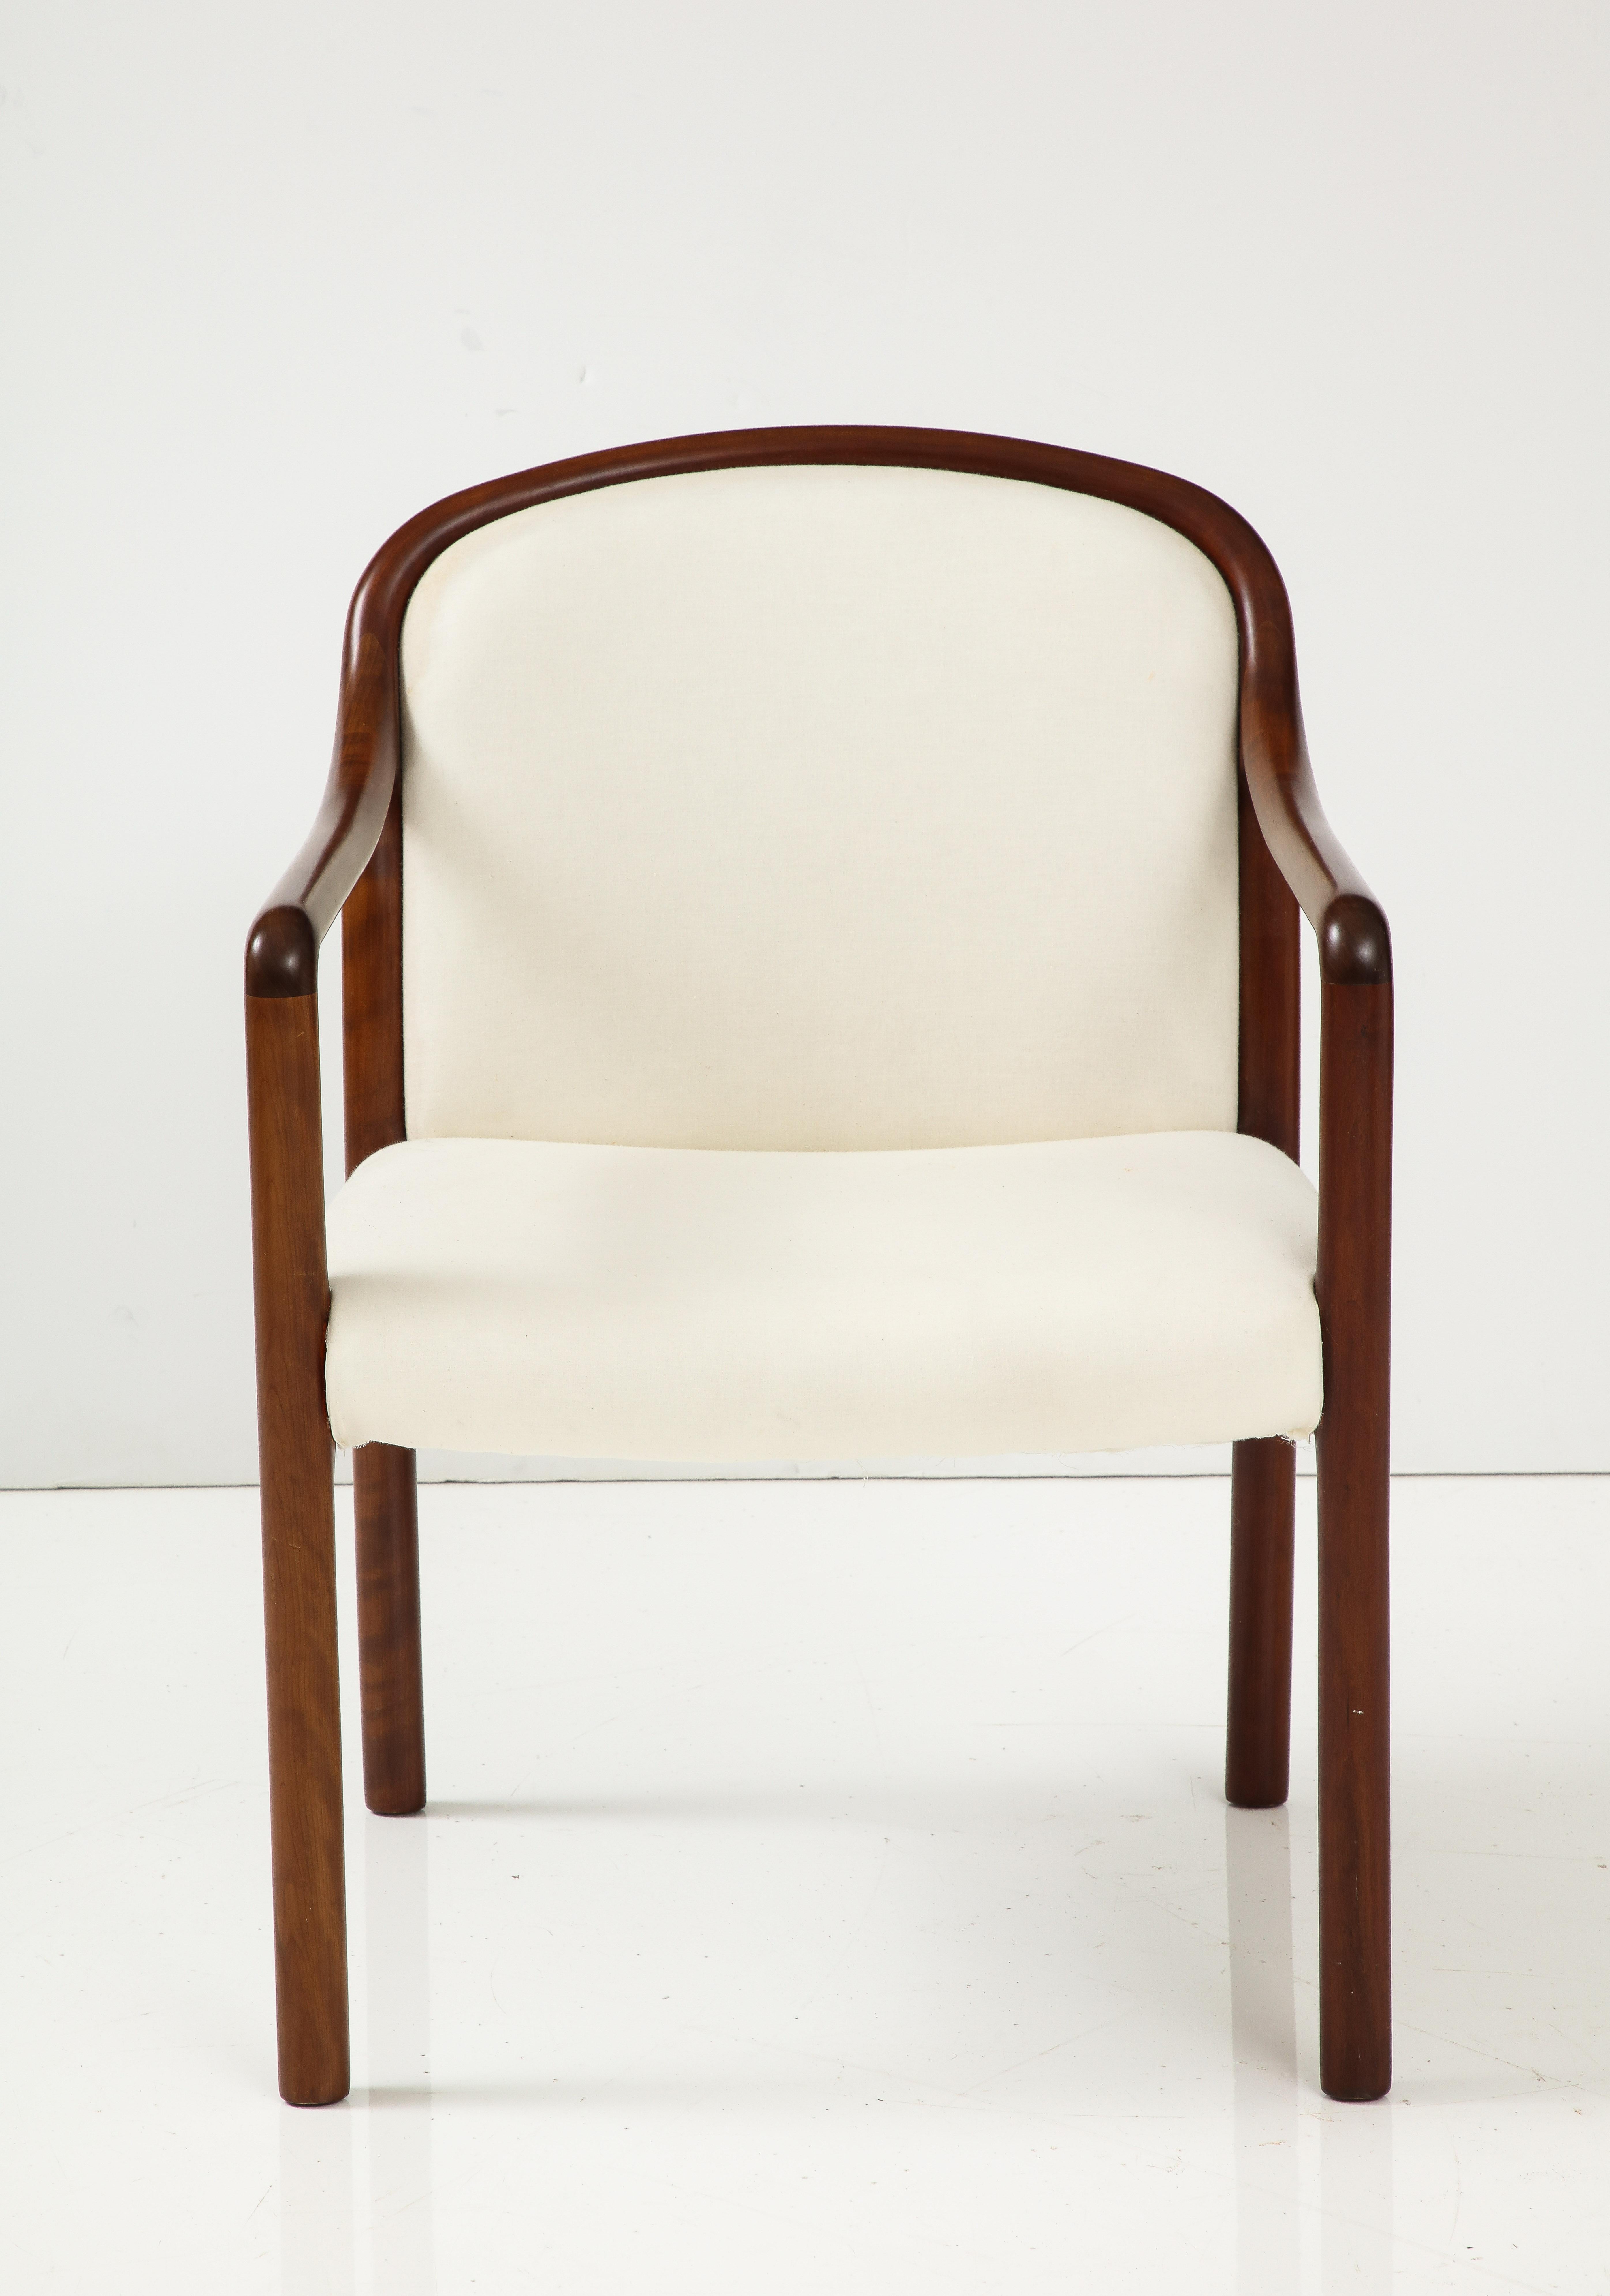 Modernist Walnut armchair with a sinuous frame with a matte oiled finish, upholstered in off white muslin. A great addition to any desk or as a side chair. Arm Height is 26inches from floor.